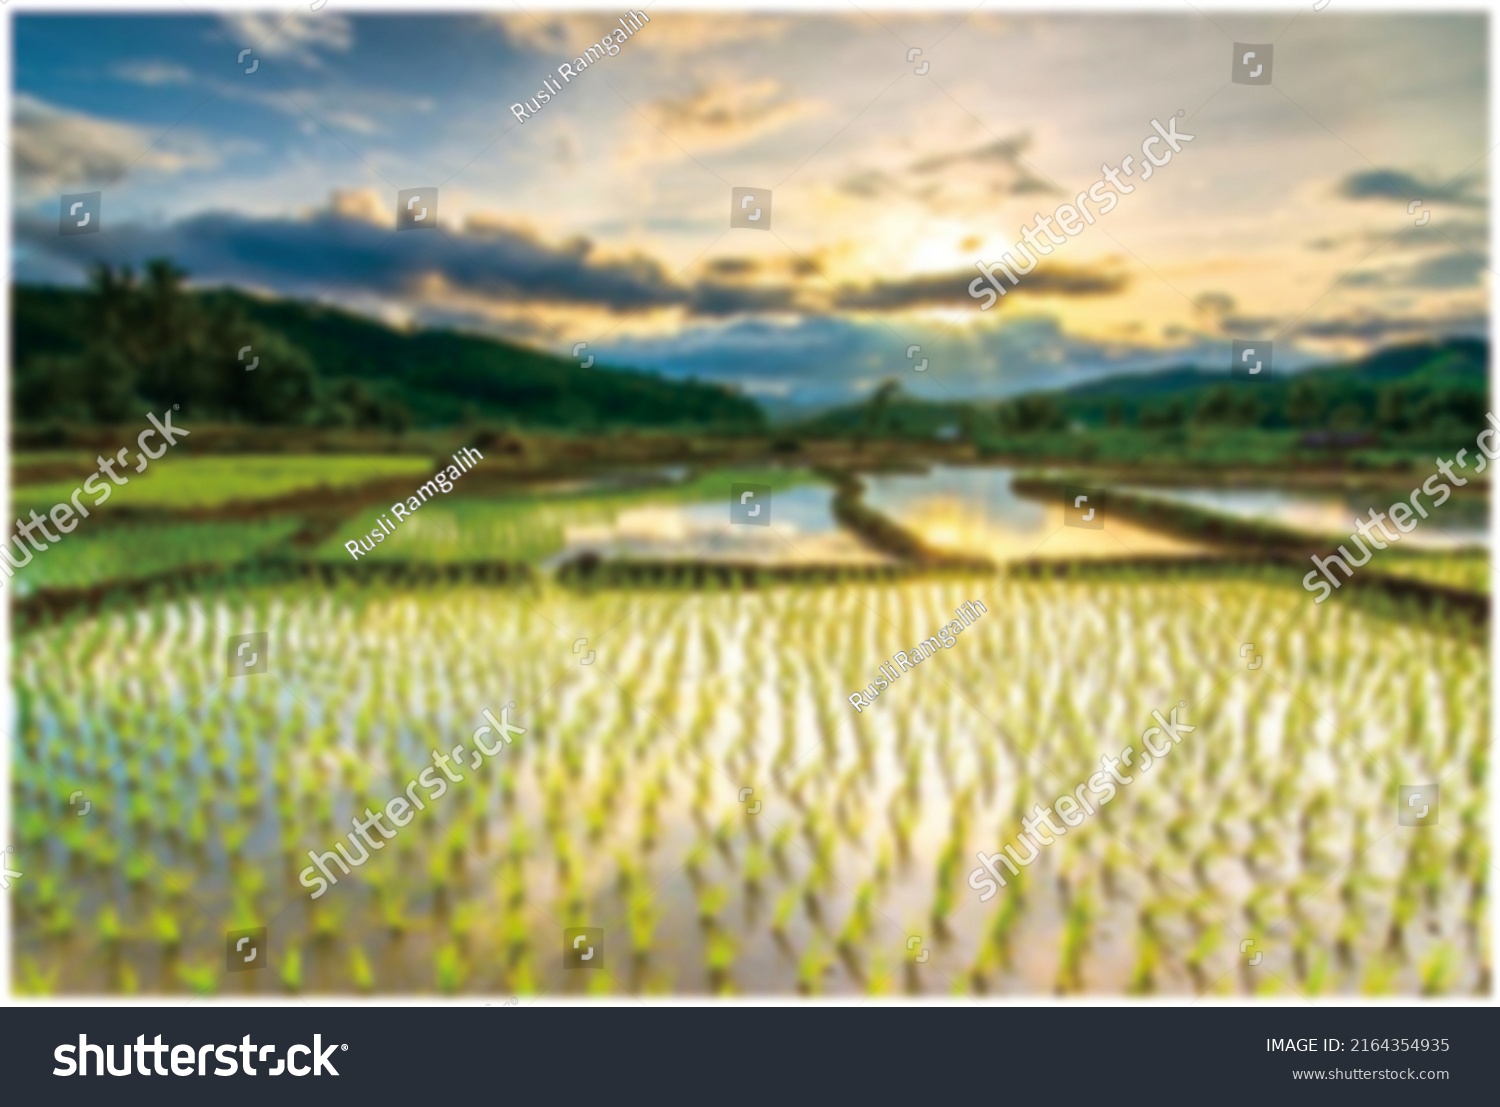 defocused abstract background of ricefield at kubang #2164354935